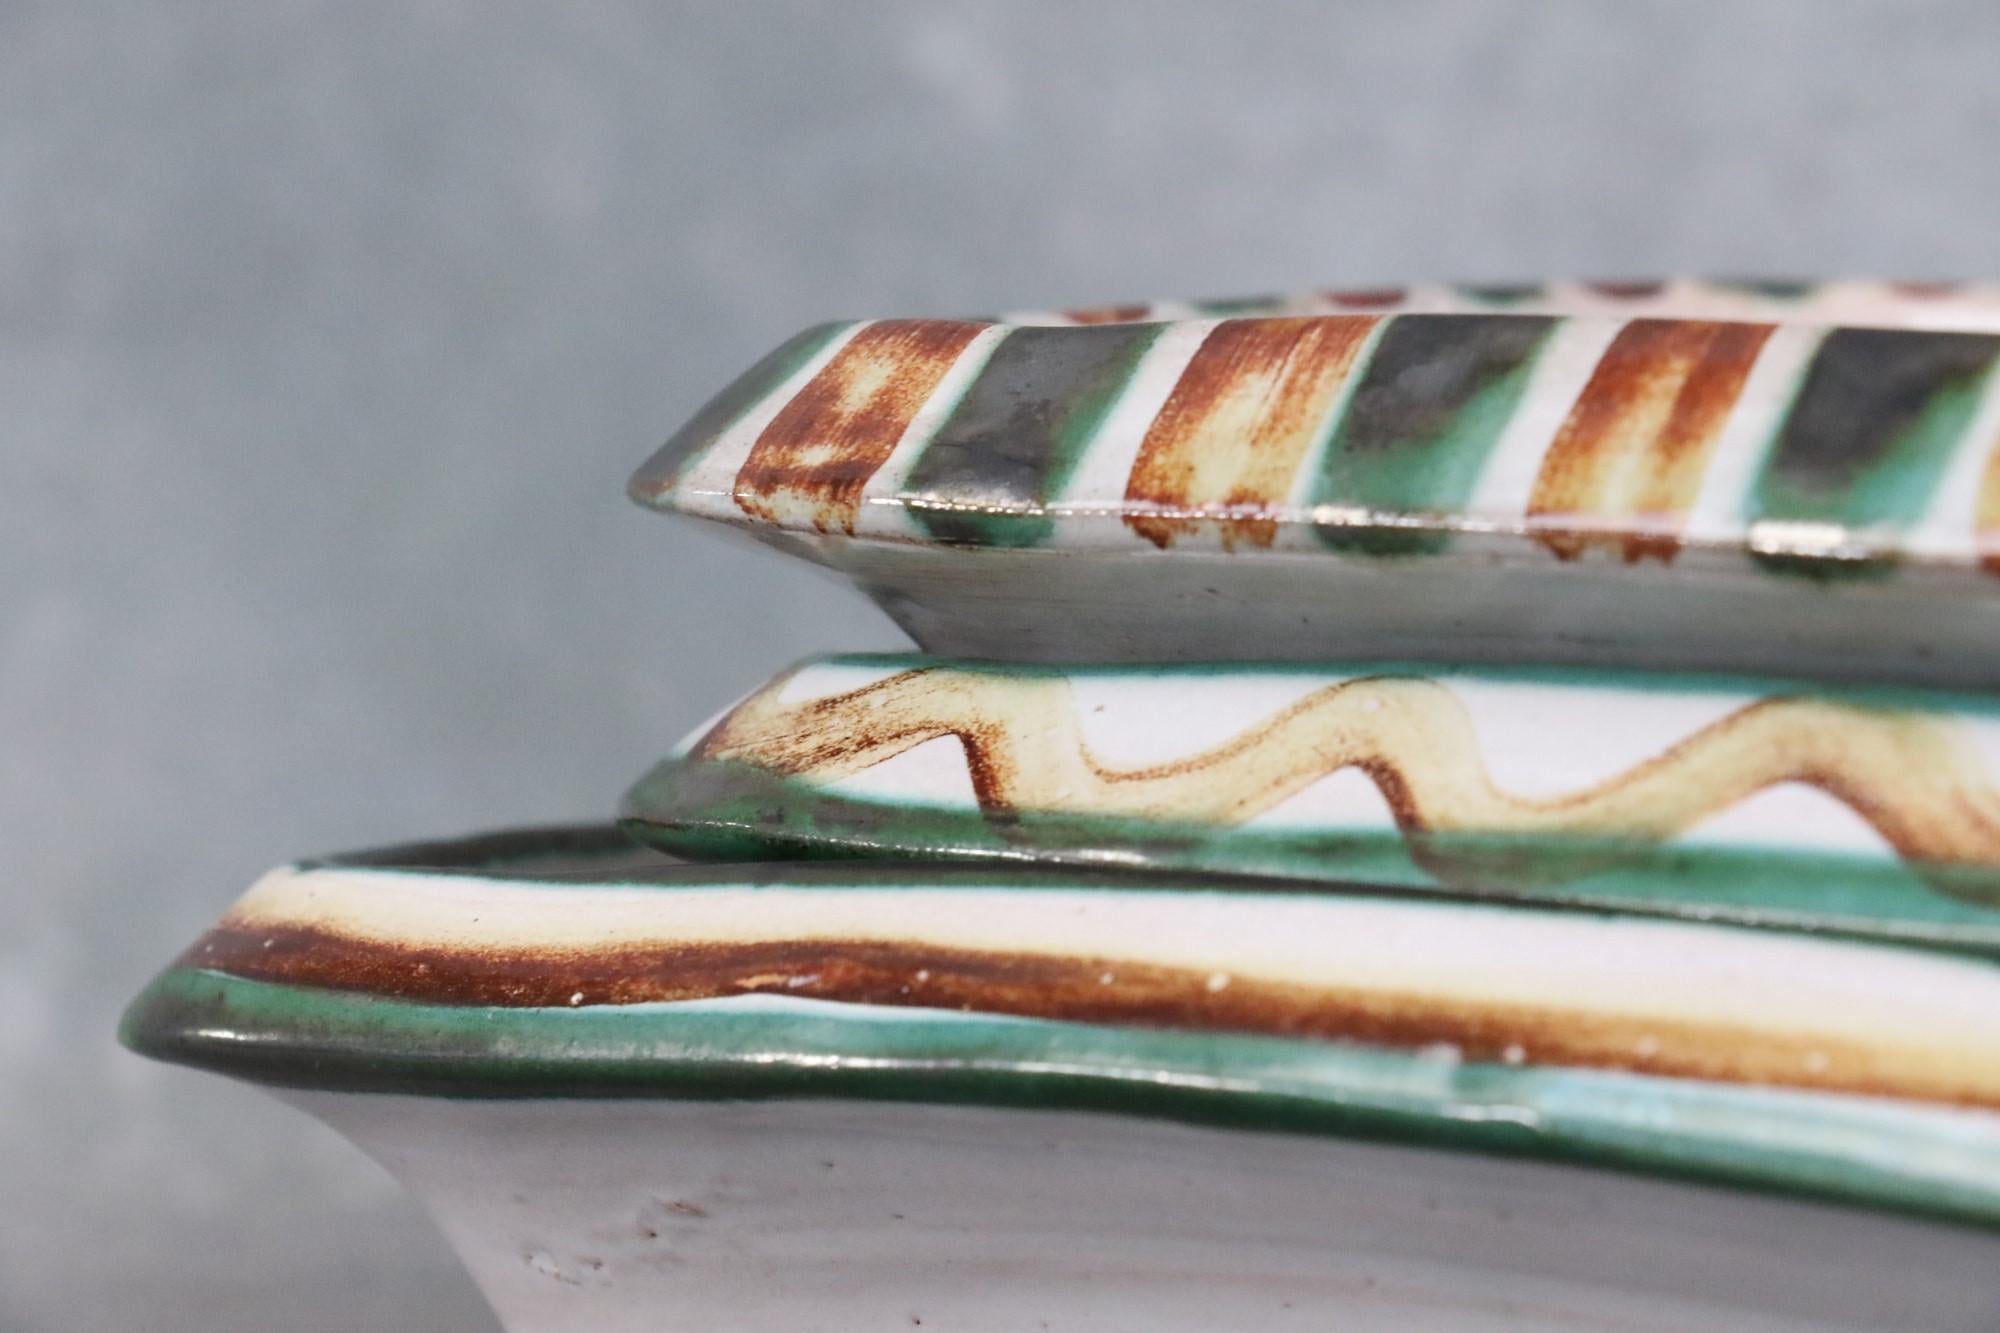 Set of 3 Ceramic Dishes by Robert Picault, Vallauris, French Ceramic, 1950's For Sale 4